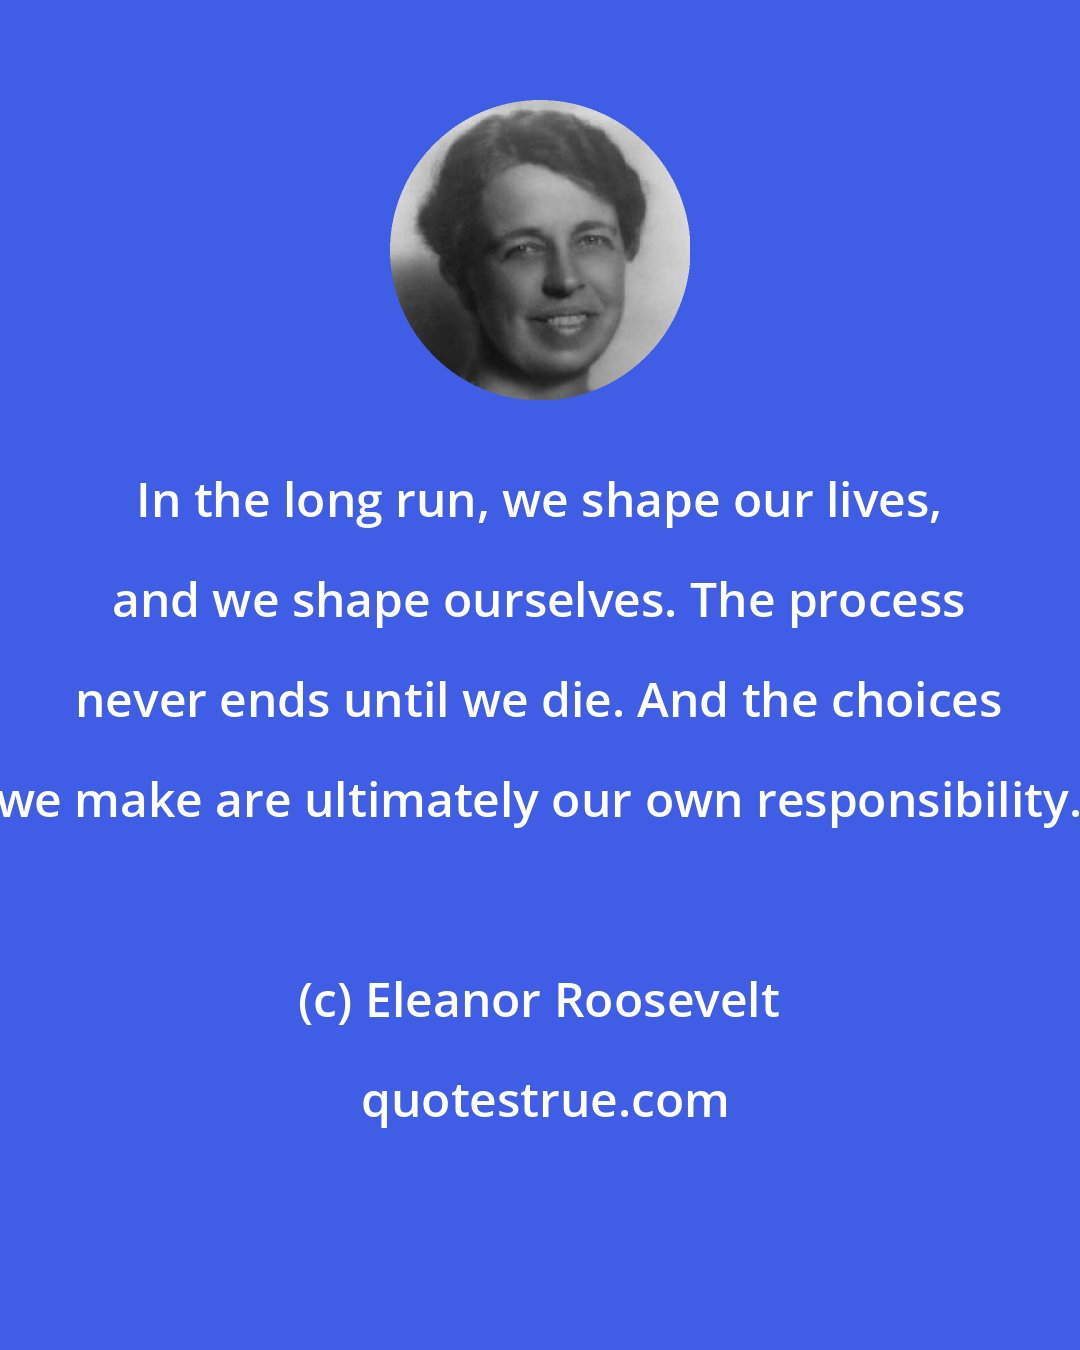 Eleanor Roosevelt: In the long run, we shape our lives, and we shape ourselves. The process never ends until we die. And the choices we make are ultimately our own responsibility.